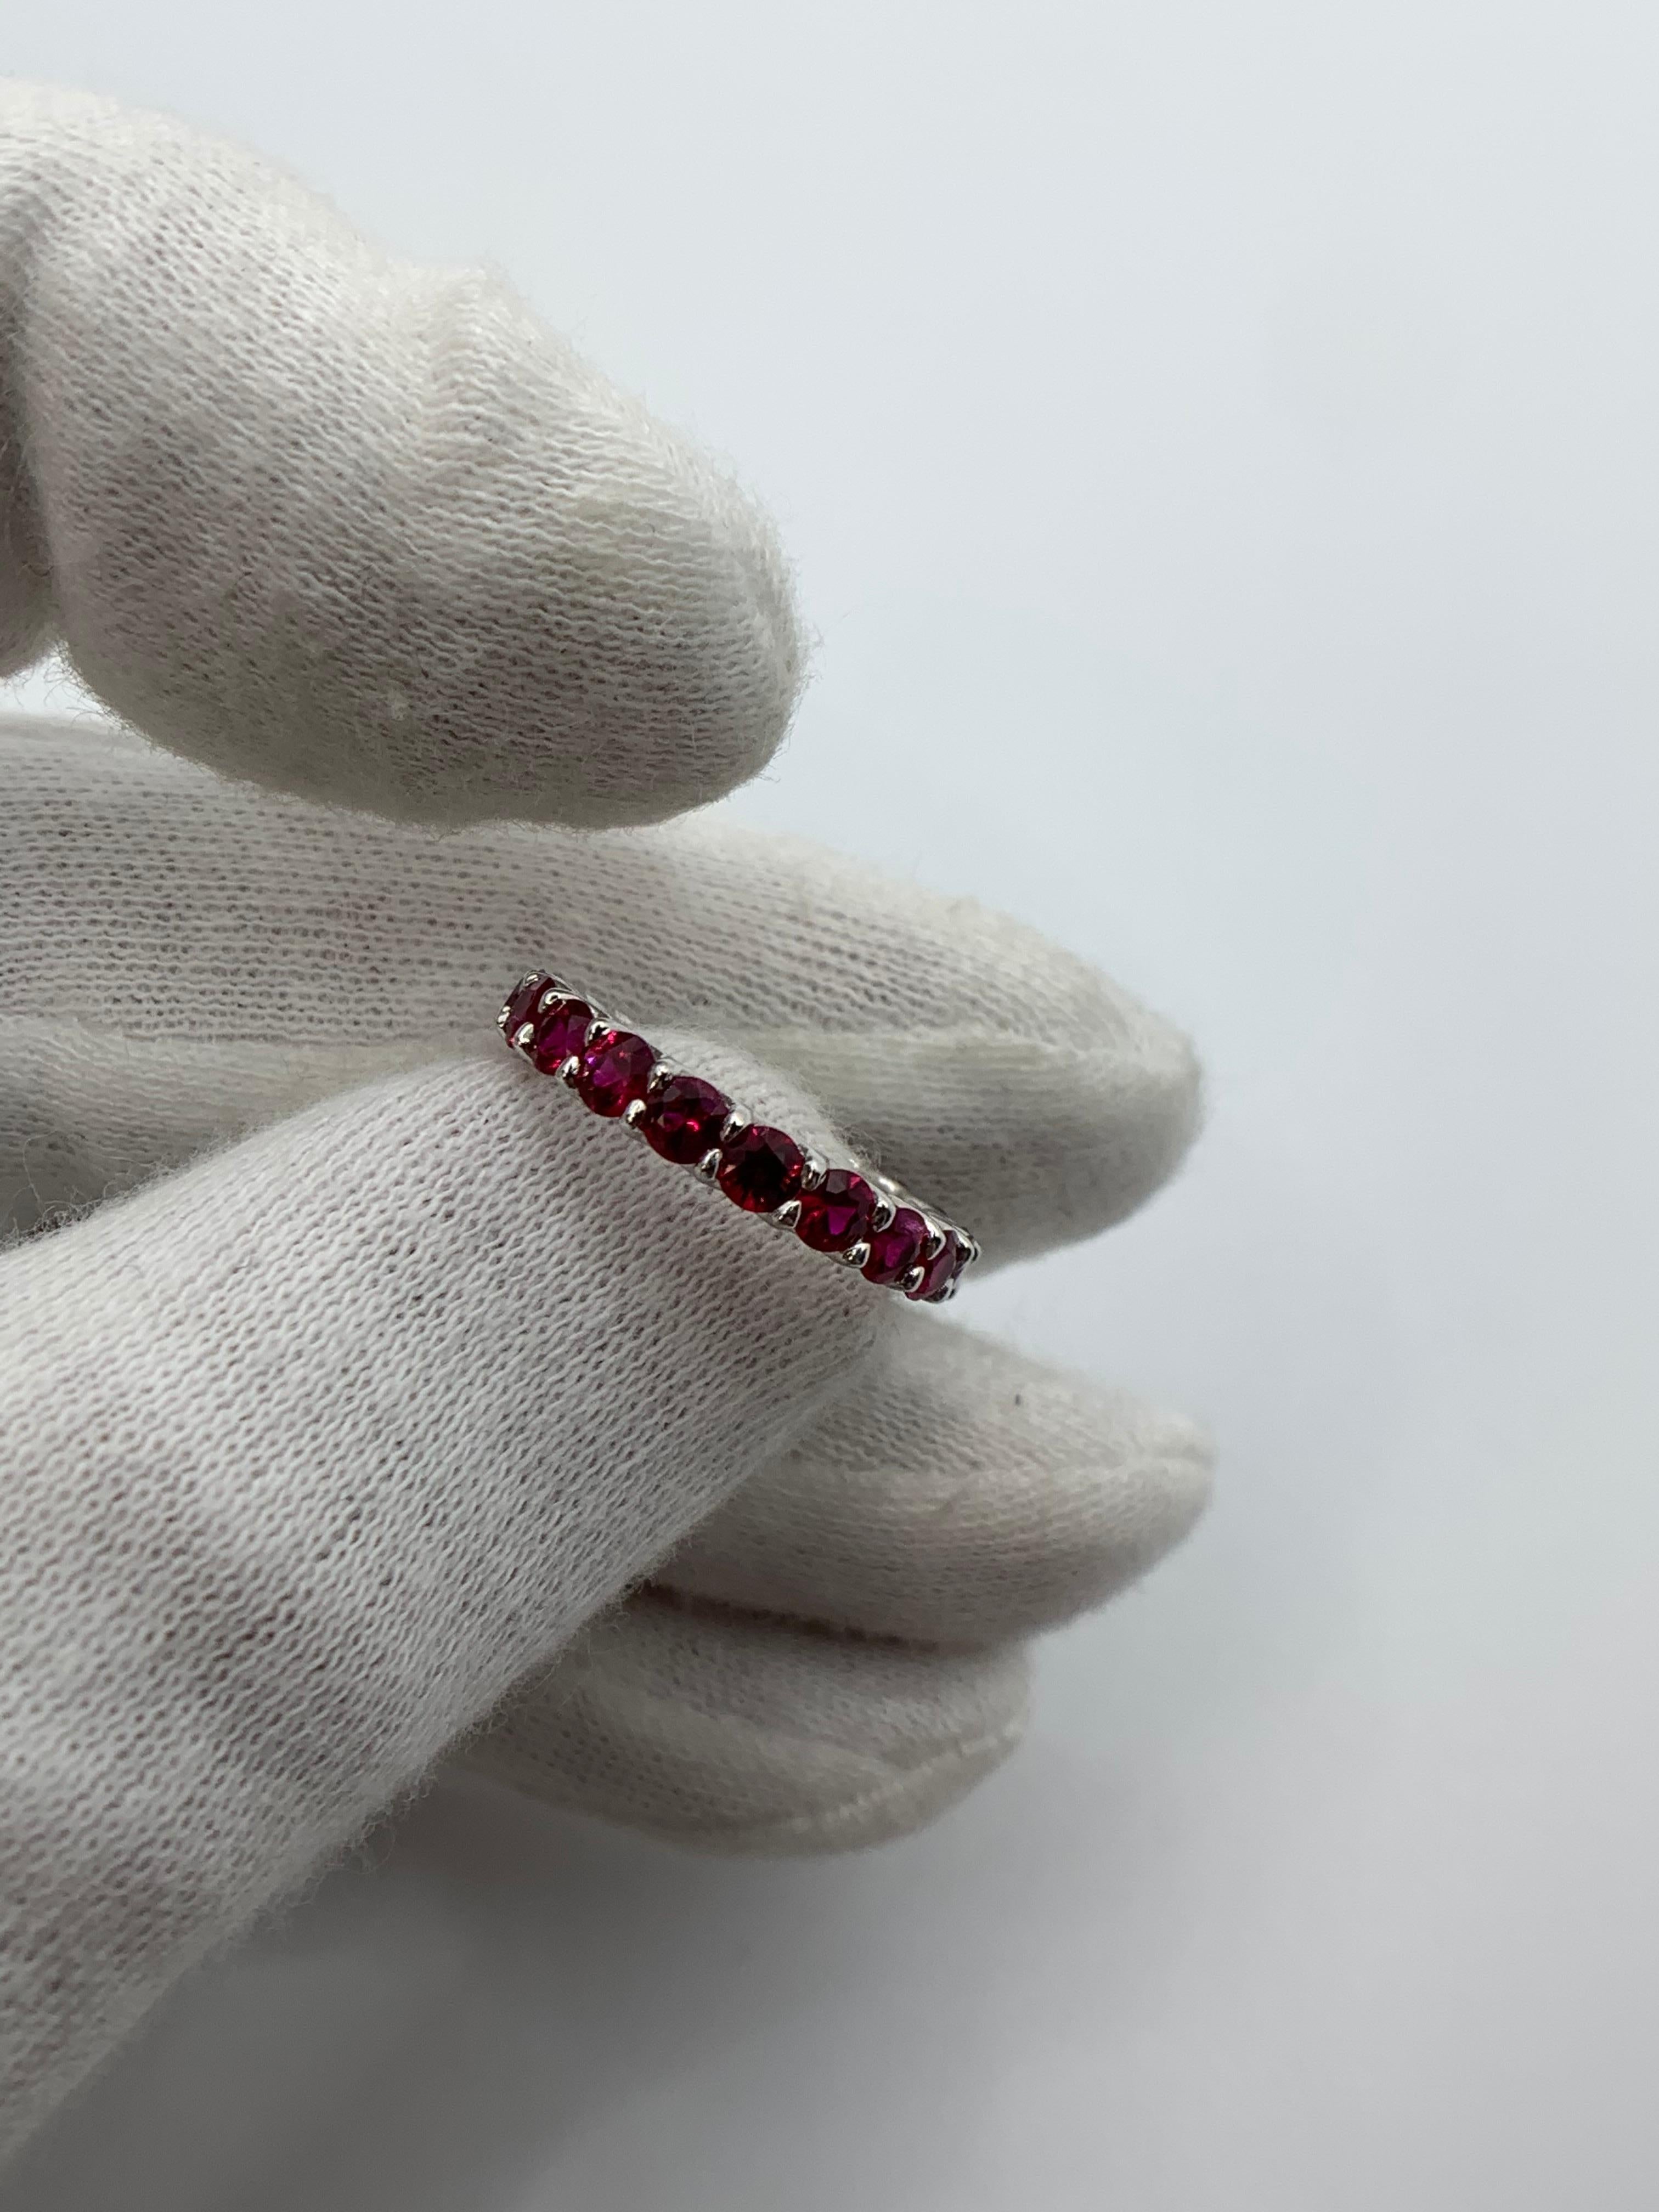 20 Round Rubies totaling 2.70 Carats. Red and Bright. Fine Quality.
Set in Platinum.
Size 6.